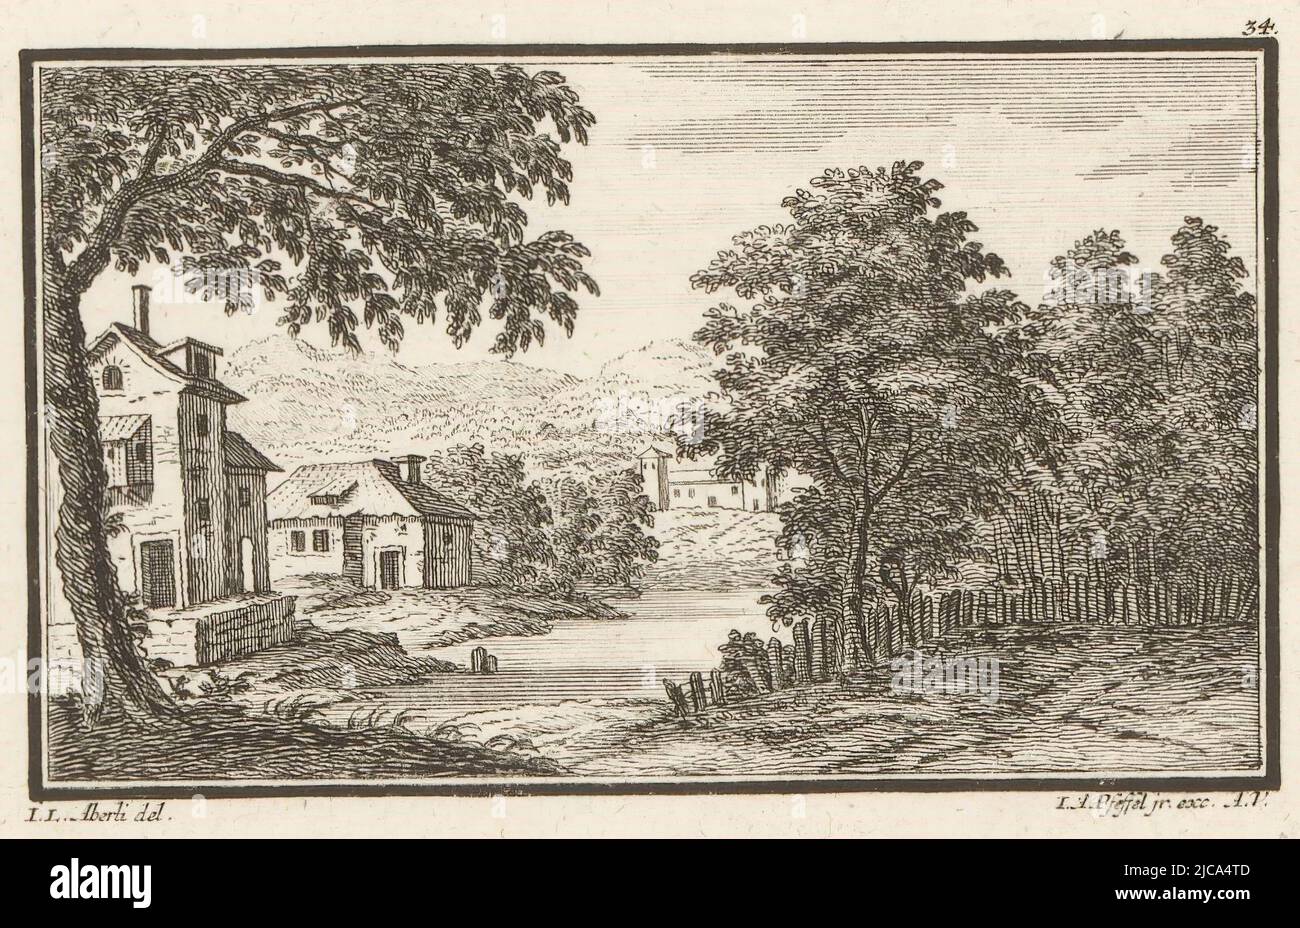 Top right printed number 34, View of a country house, print maker: Johann Andreas Pfeffel (der Jüngere), (mentioned on object), intermediary draughtsman: Johann Ludwig Aberli, (mentioned on object), 1725 - 1768, paper, etching, h 118 mm - w 152 mm Stock Photo